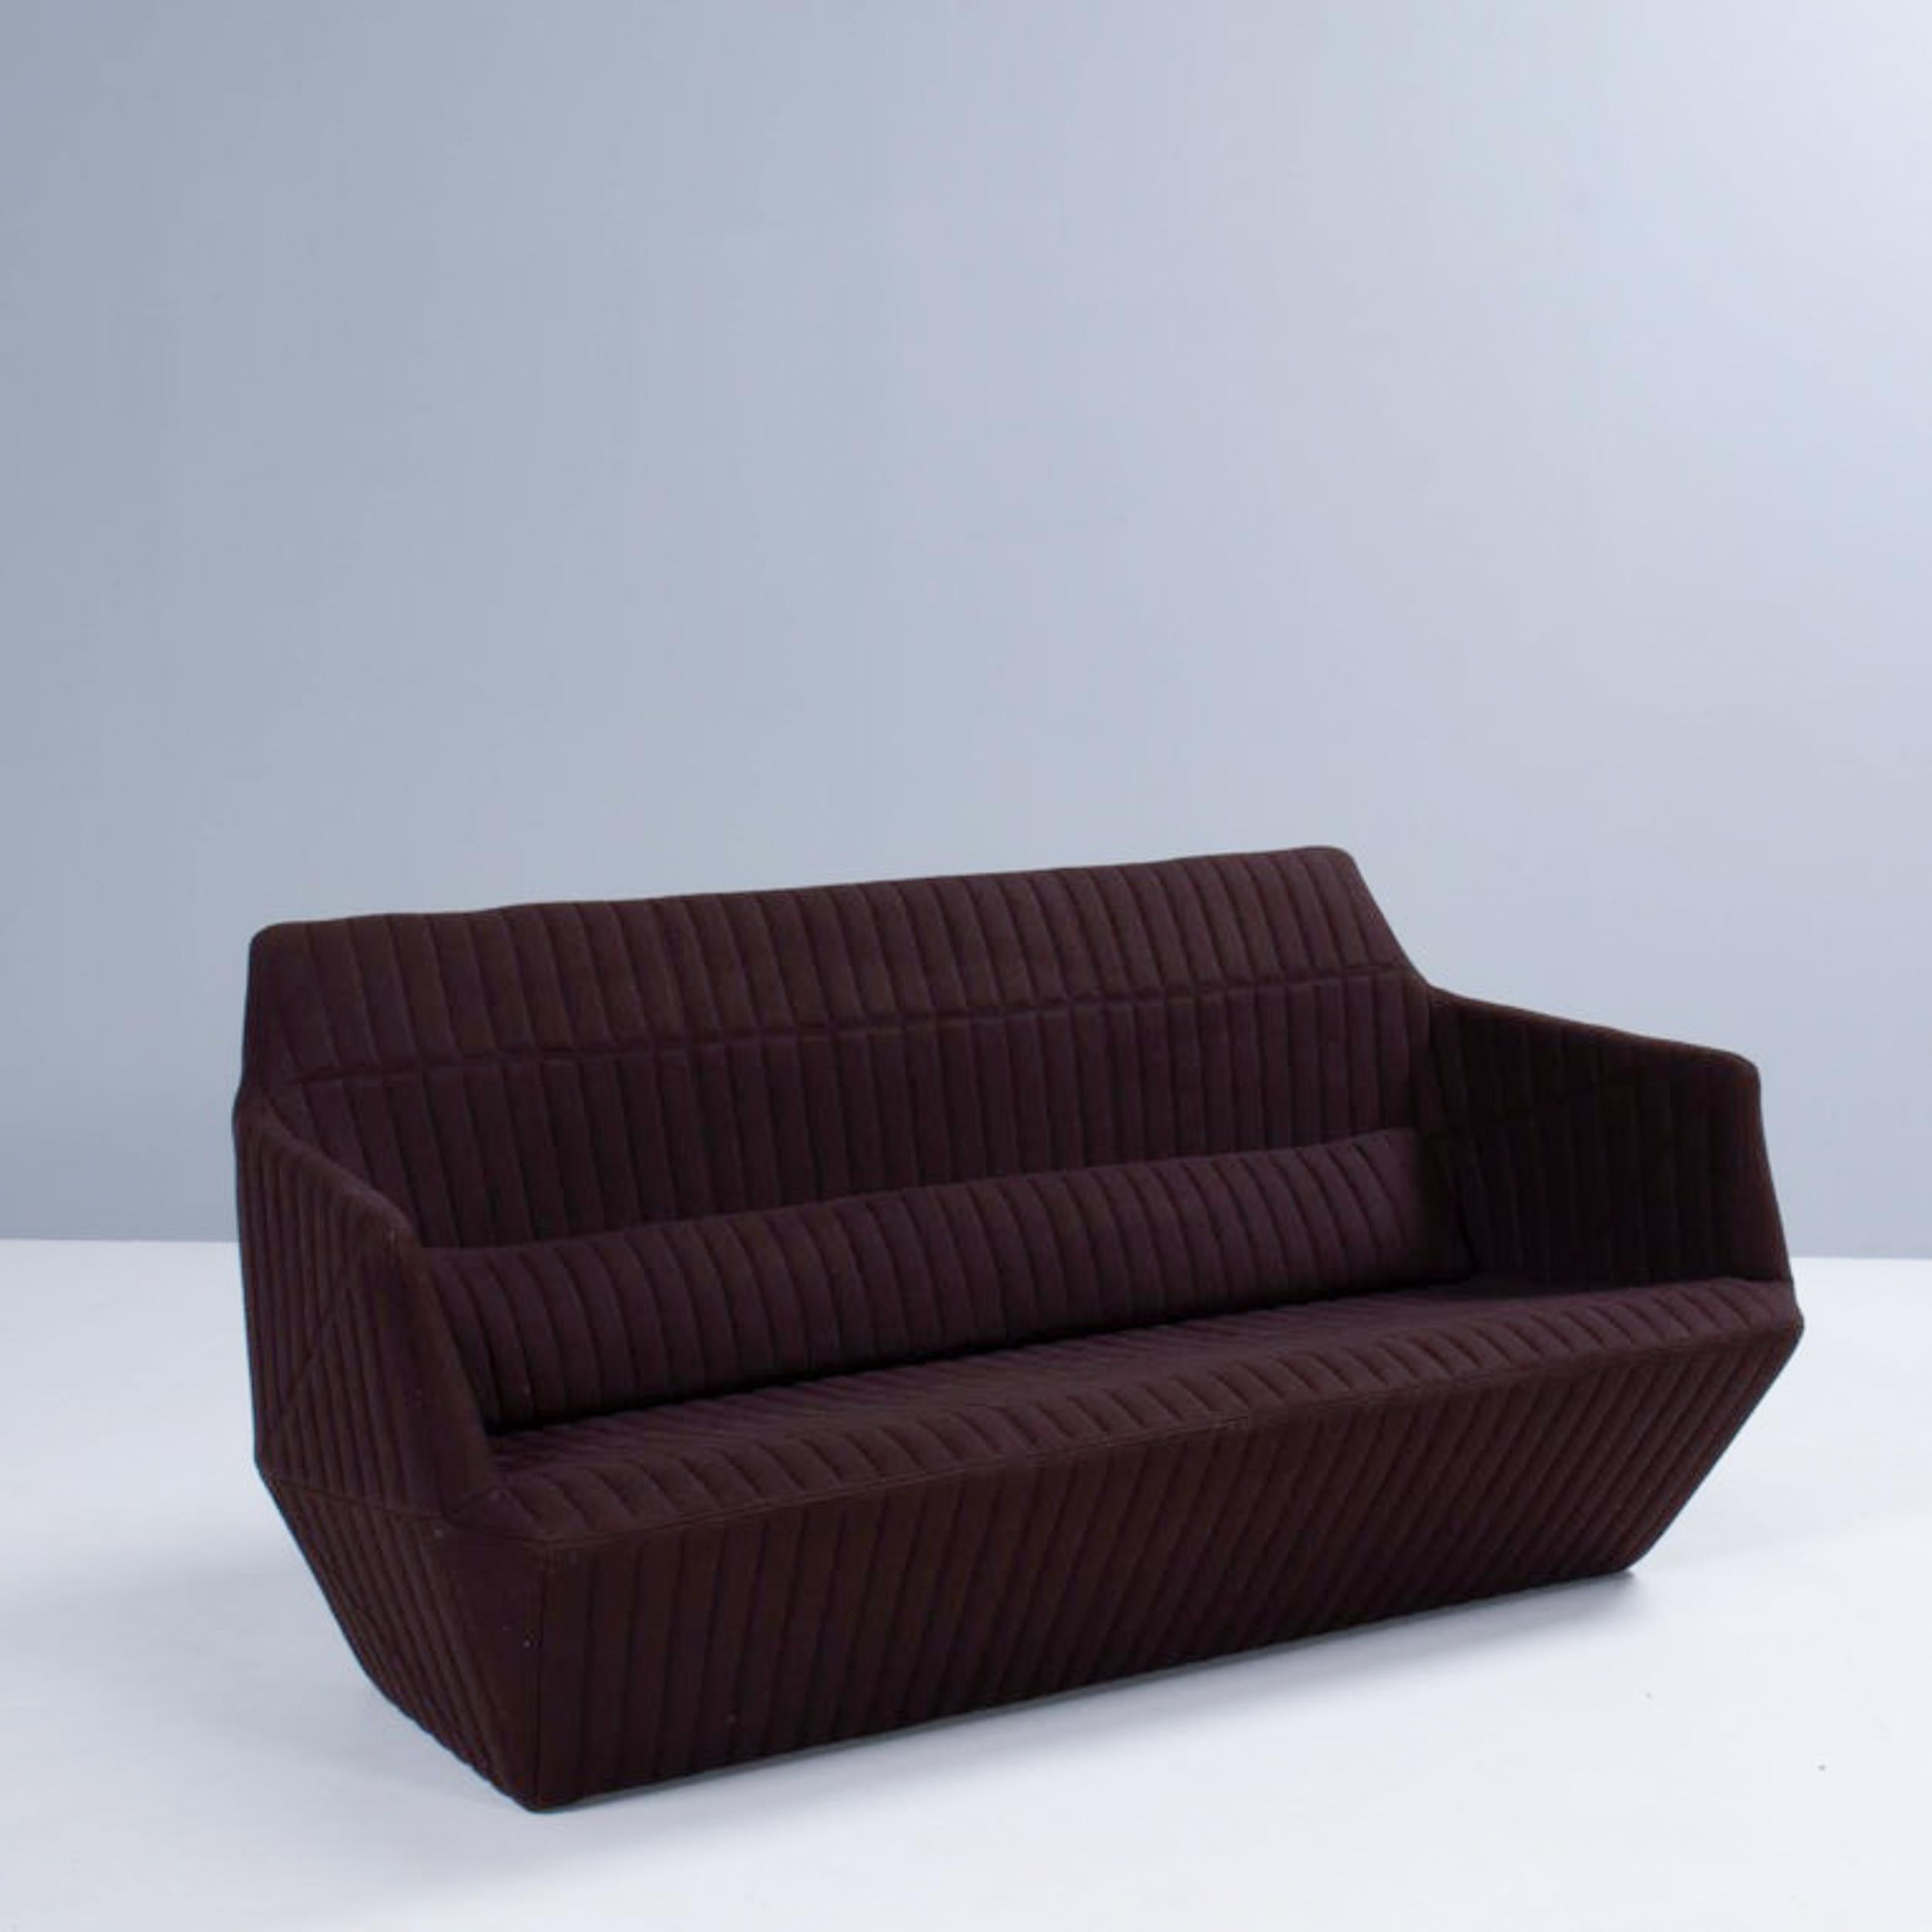 Designed by Ronan and Erwan Bouroullec in 2005, the Facett sofa balances minimalism and complexity to create a sophisticated modern design.

The sofa is a large, single structure with integral back and seat cushions with an additional lumbar